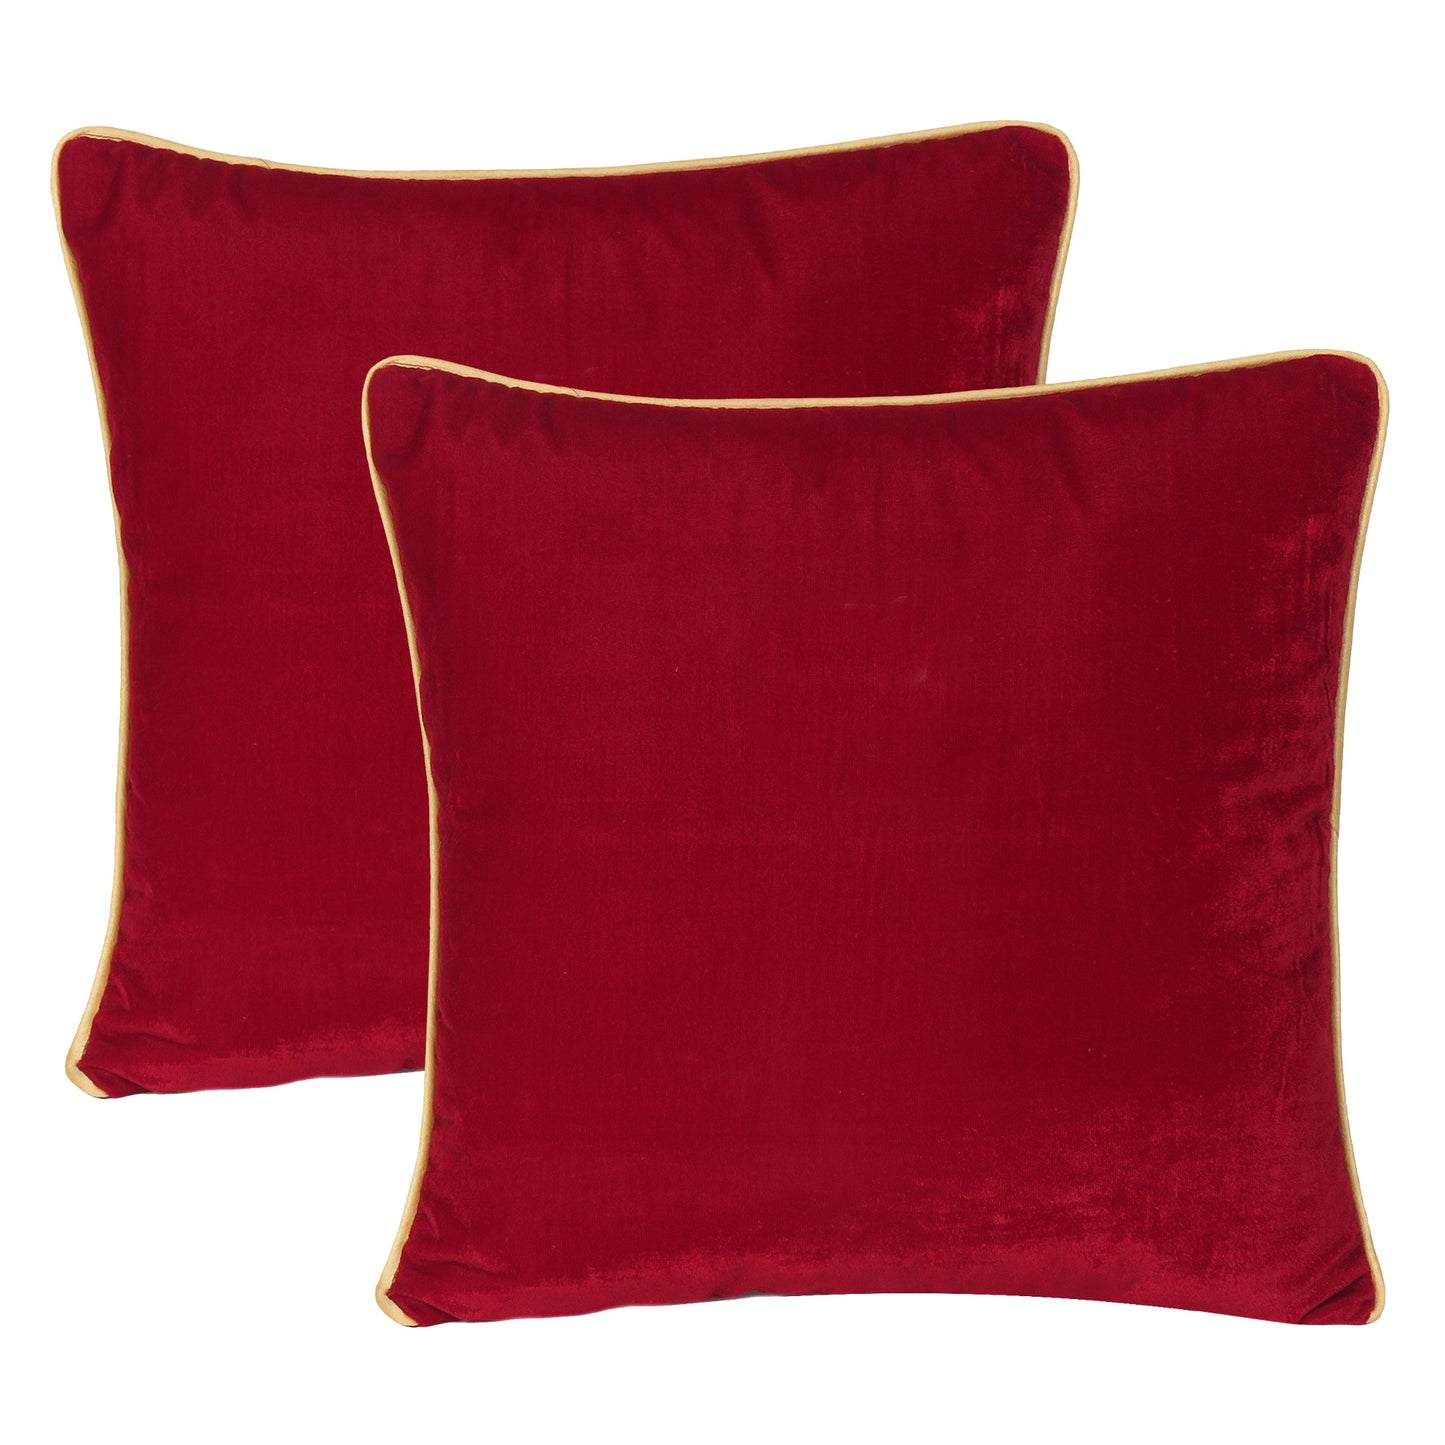 Maroon Velvet Cushion Cover with Gold Piping Edge in Set of 2